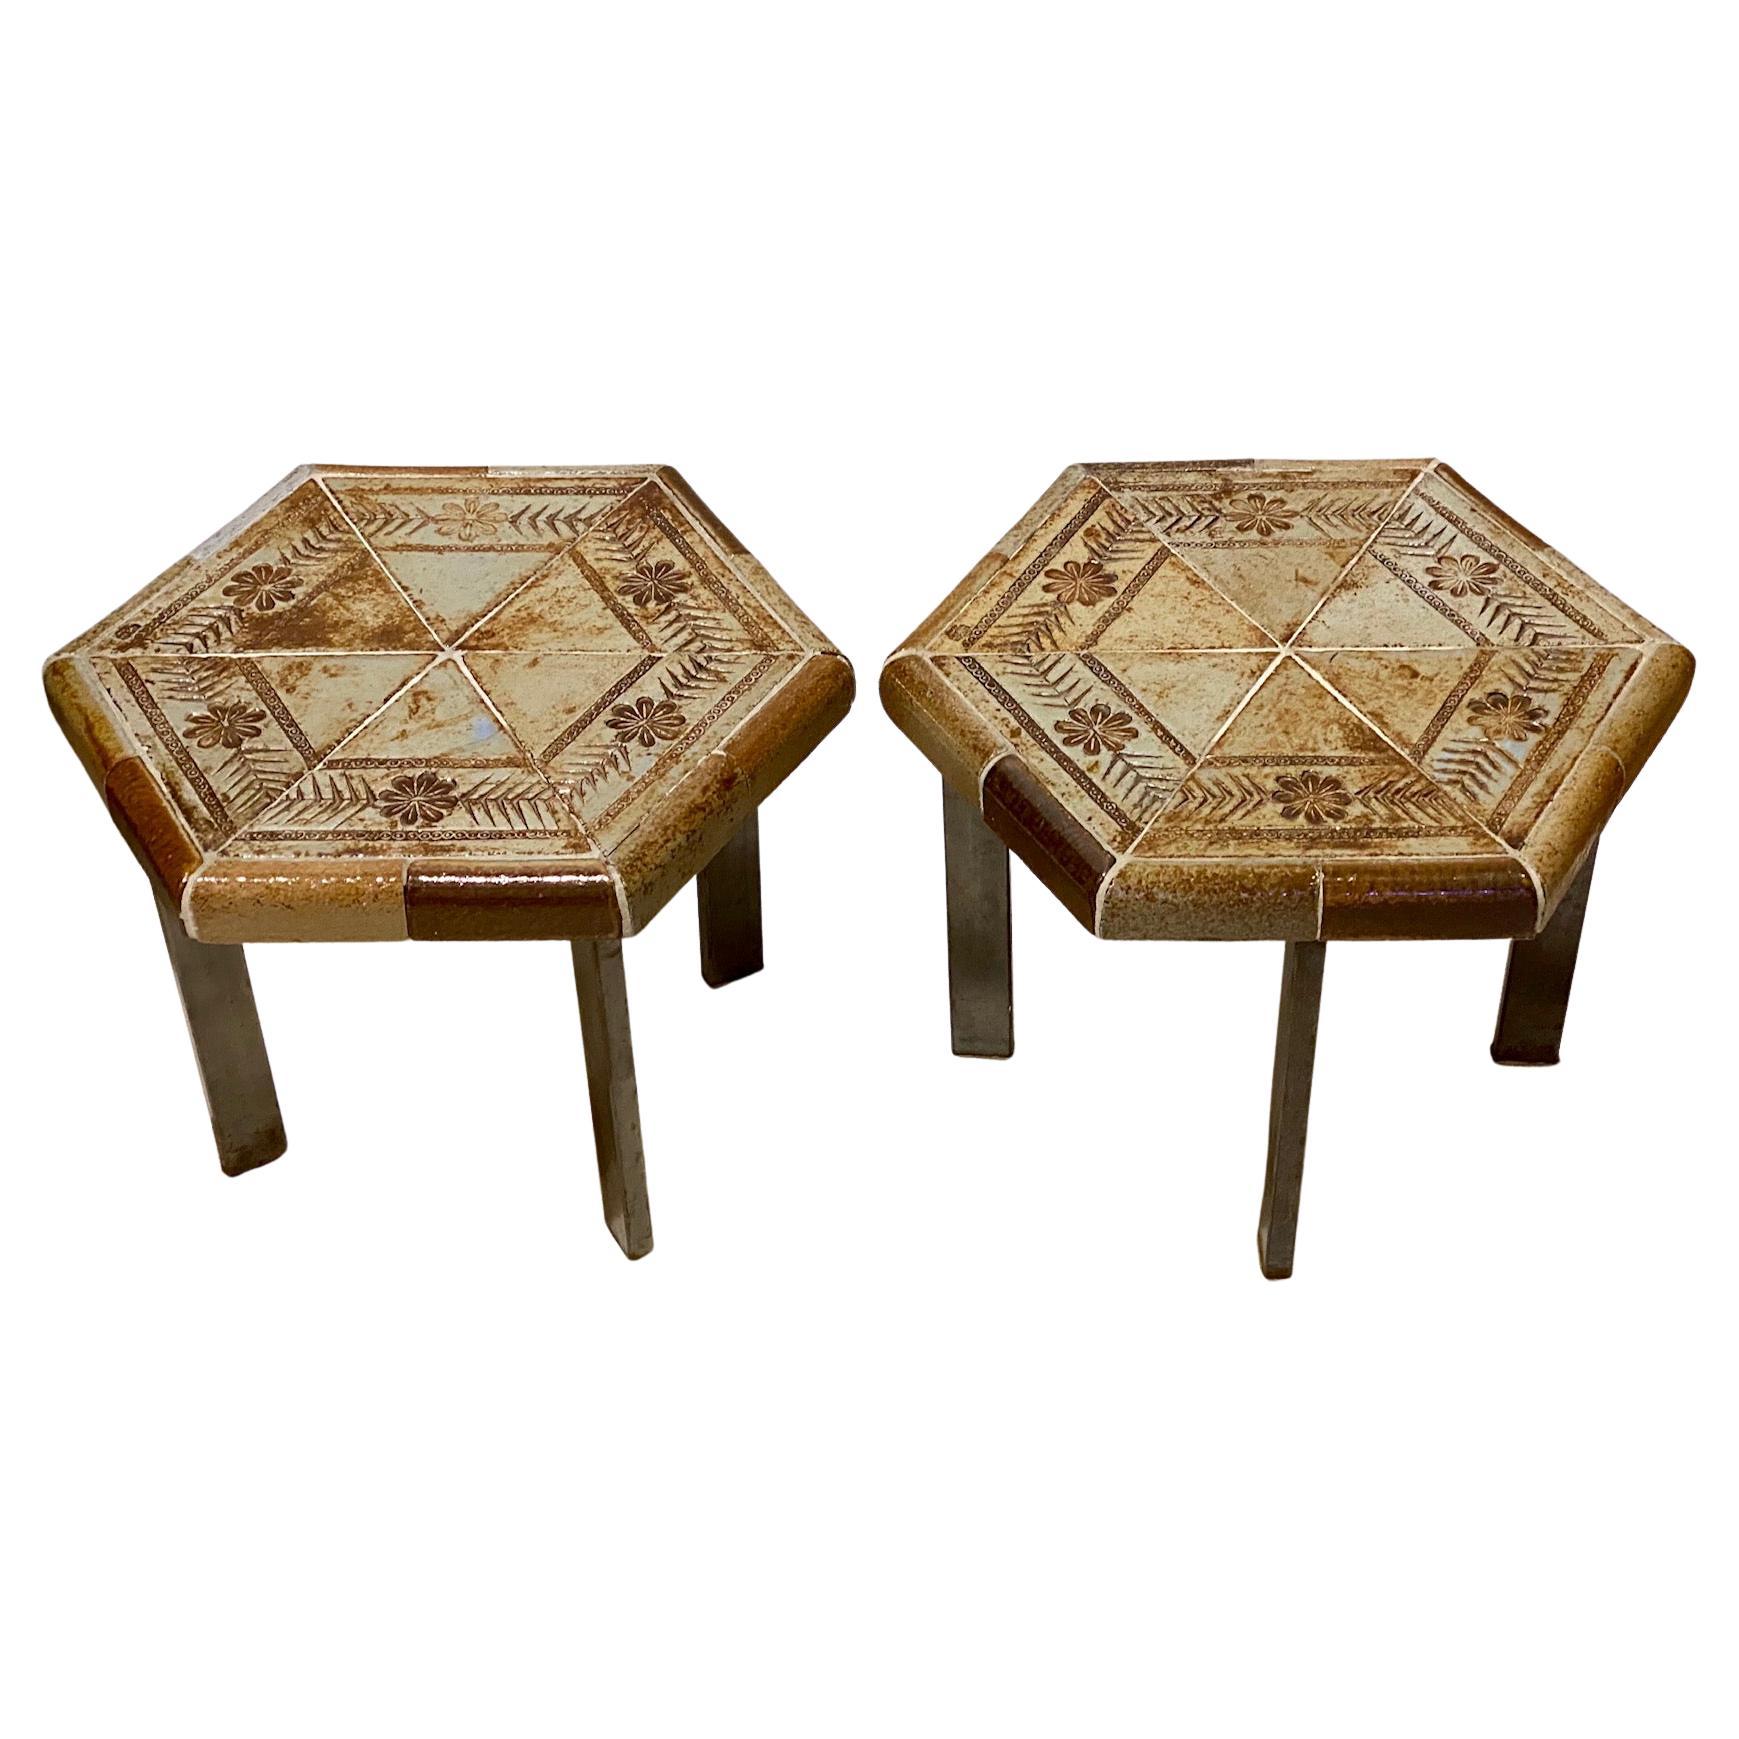 Roger Capron Pair of Small Ceramic Side Tables 1960s For Sale